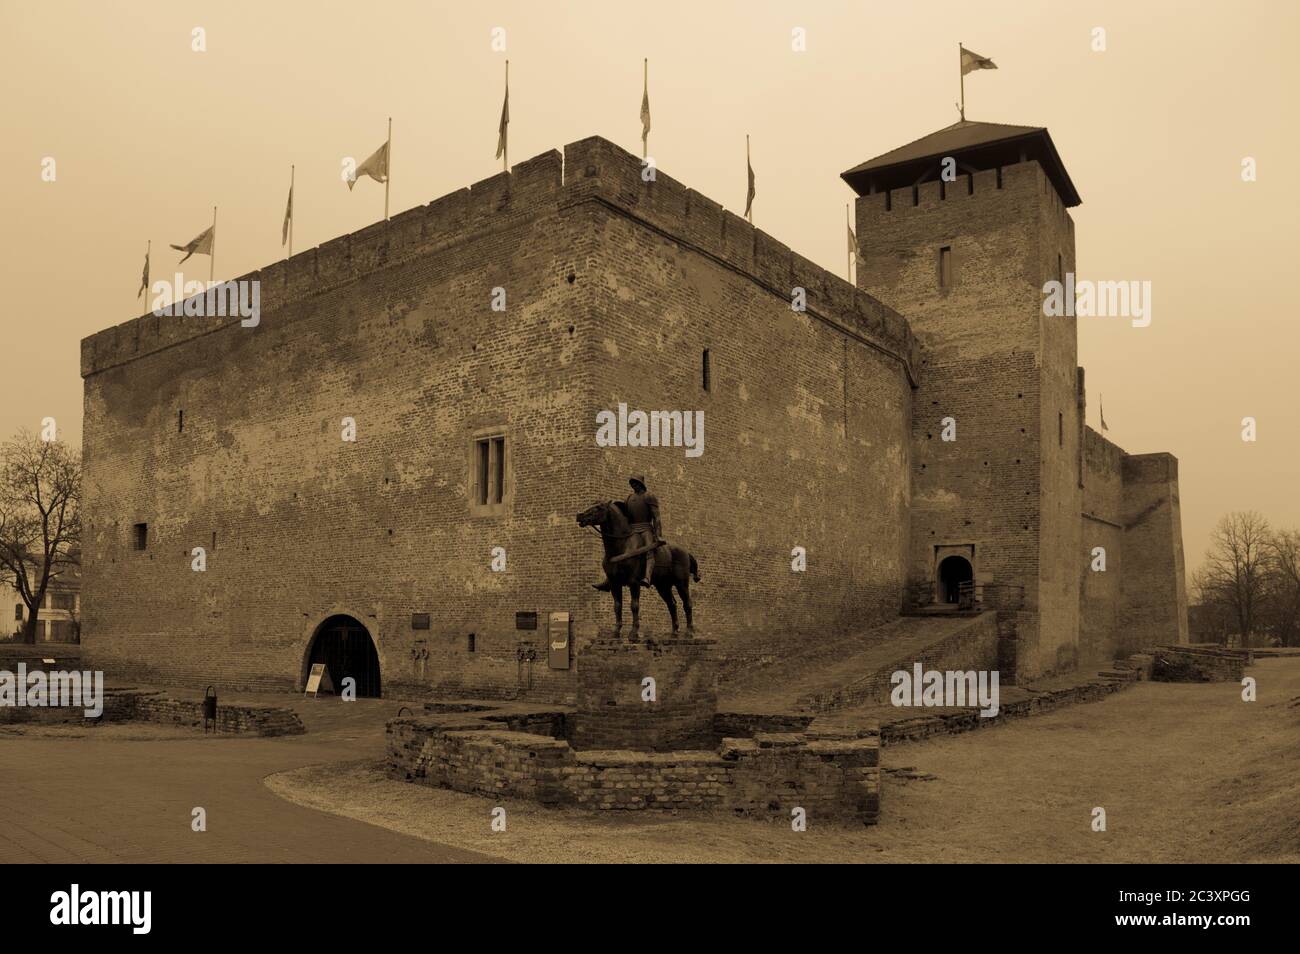 Full view of Gyula Castle, Hungary in sepia colors Stock Photo